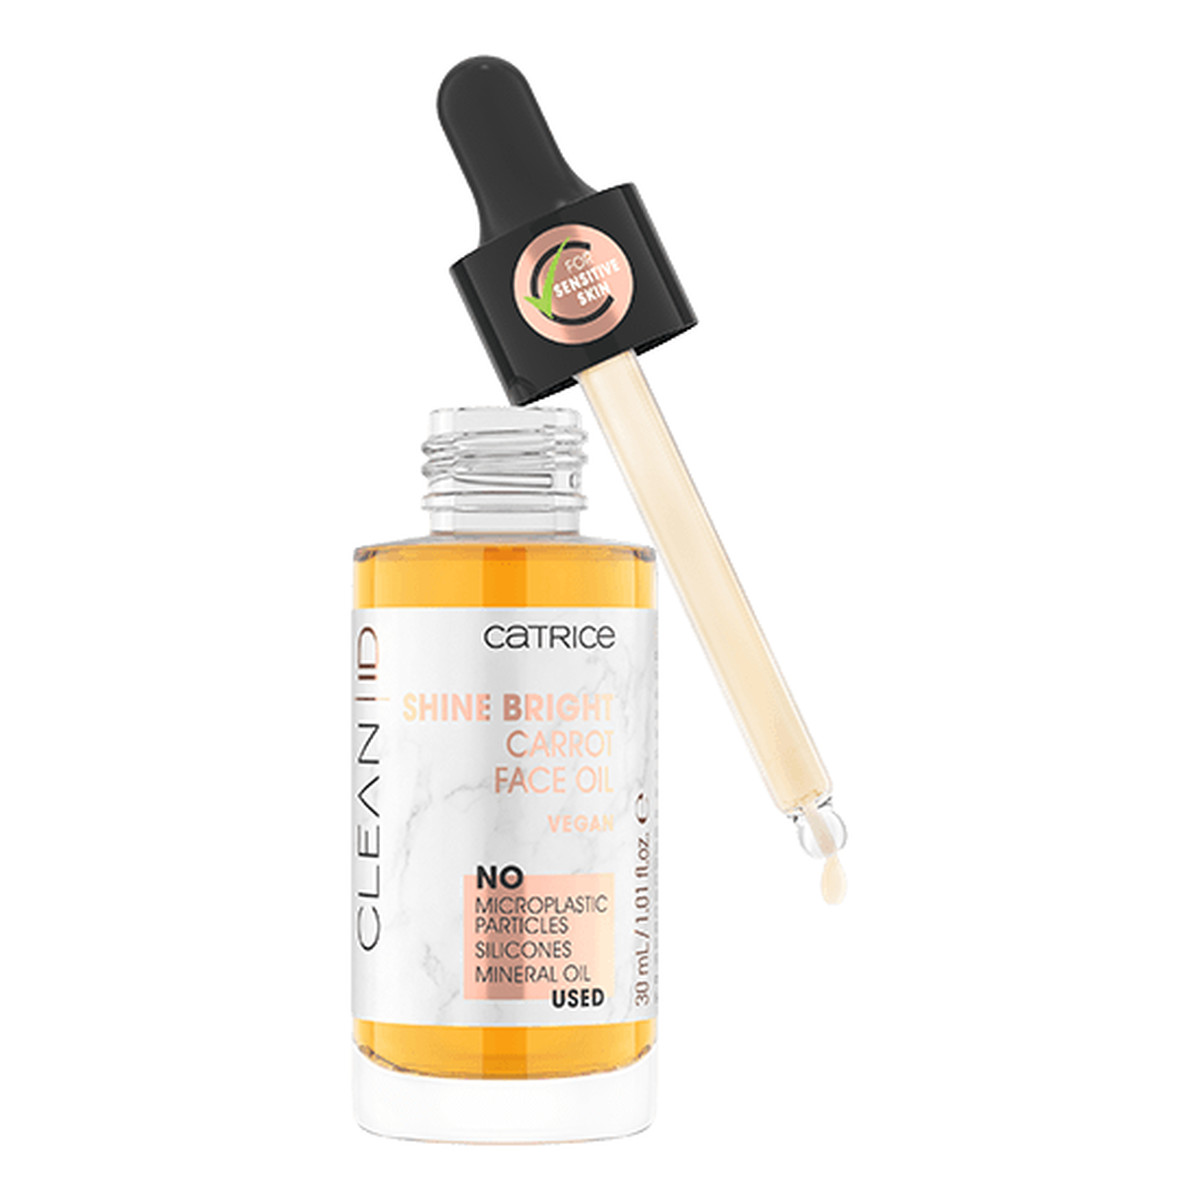 Catrice Clean ID Shine Bright Carrot Face Oil Olejek do twarzy 30ml